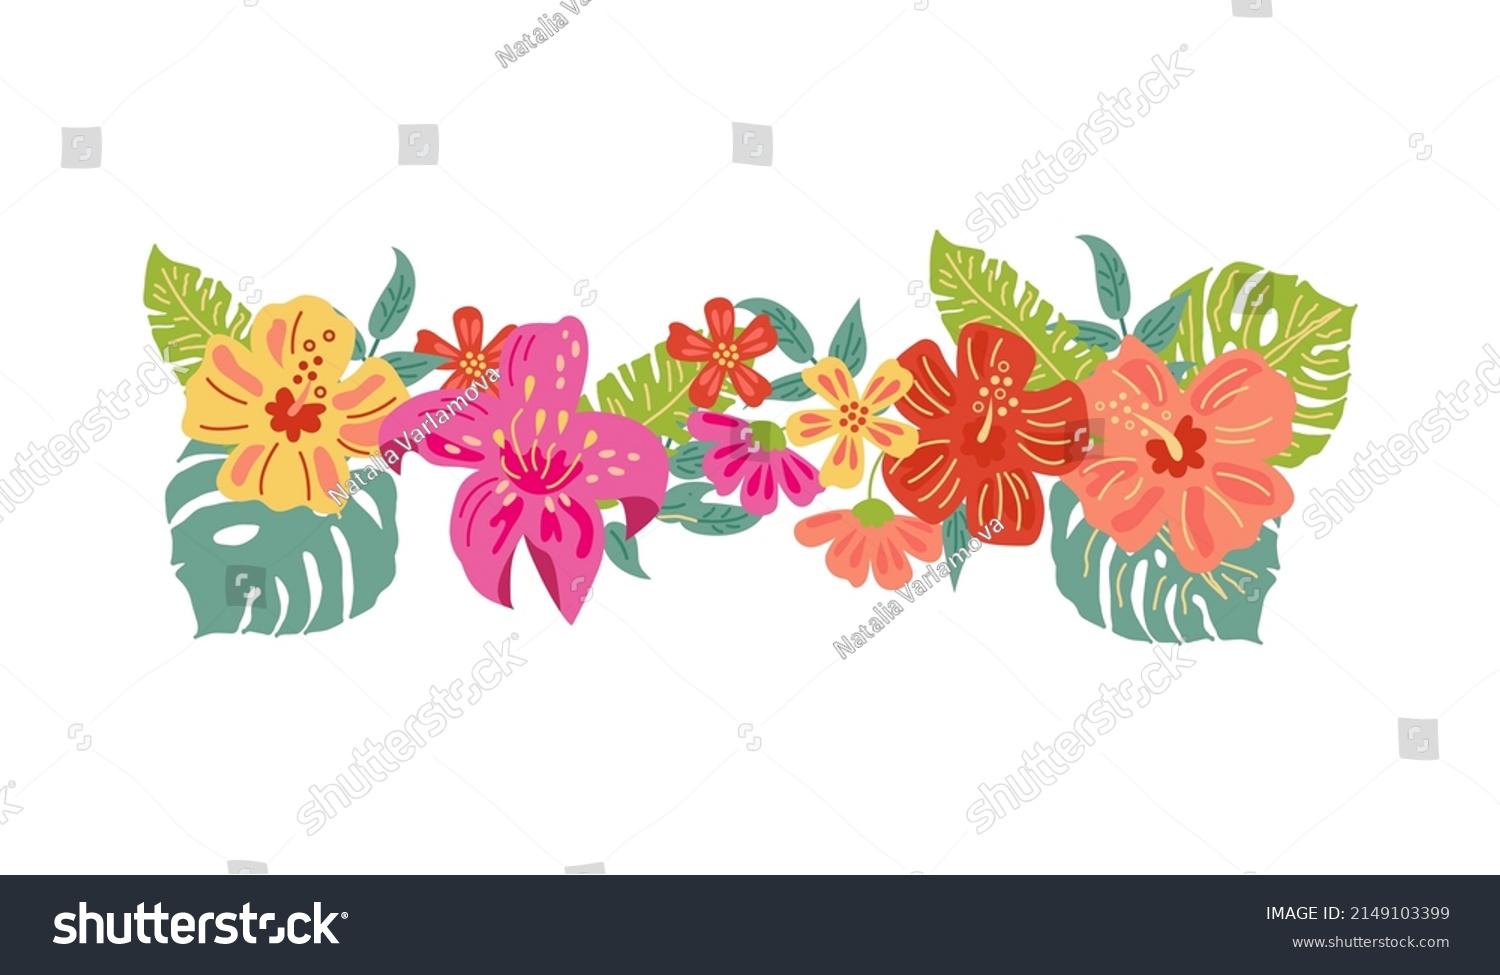 SVG of Tropical exotic flowers and leaves. Vector illustration isolated on white background. Flat style design element for poster, banner, party invitation, summer concept. svg